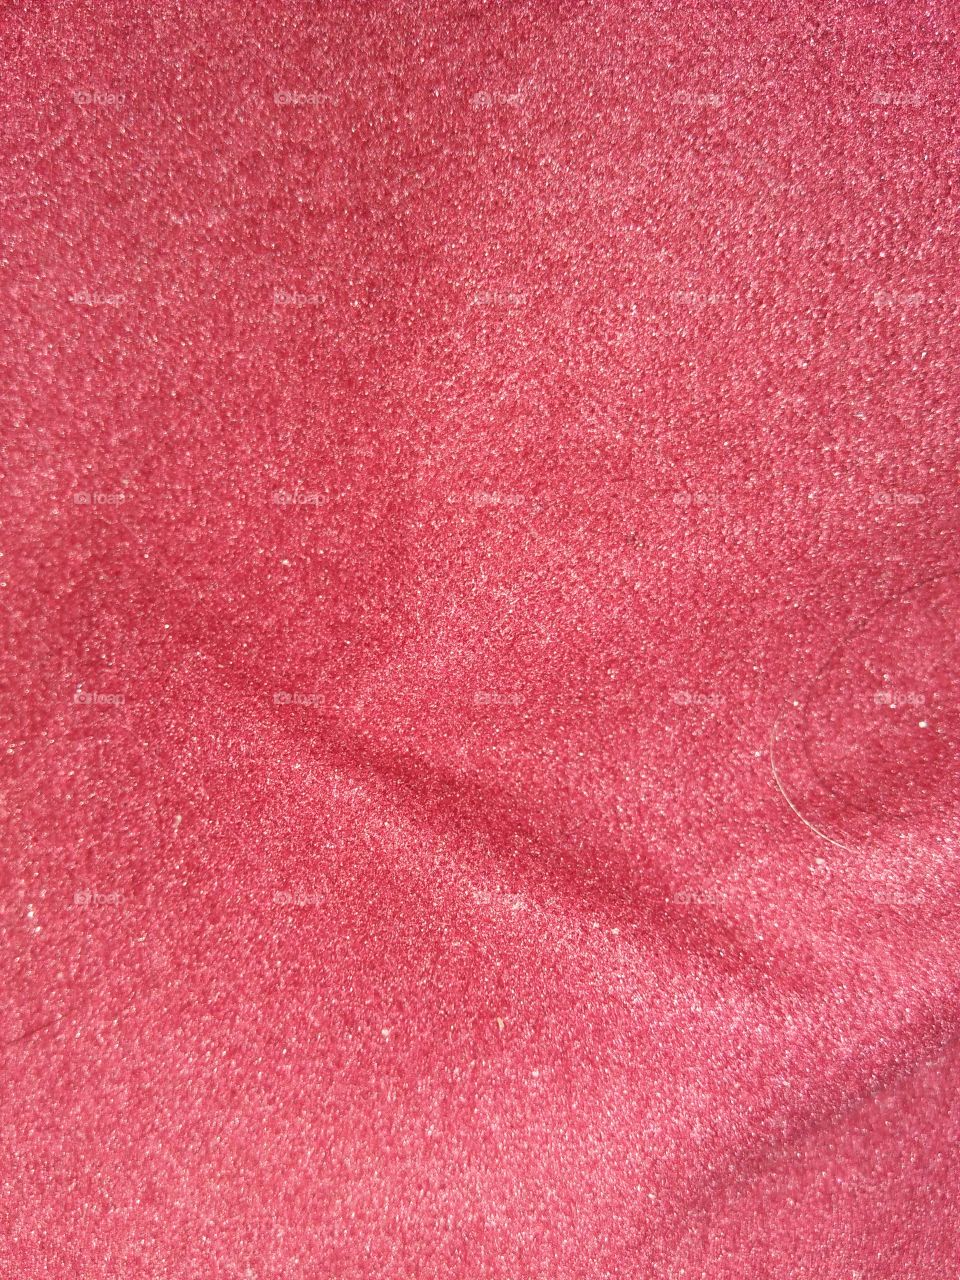 fiber backgrounds Textured full frame pink colour textile arts culture and entertainment pattern close up in Patna India